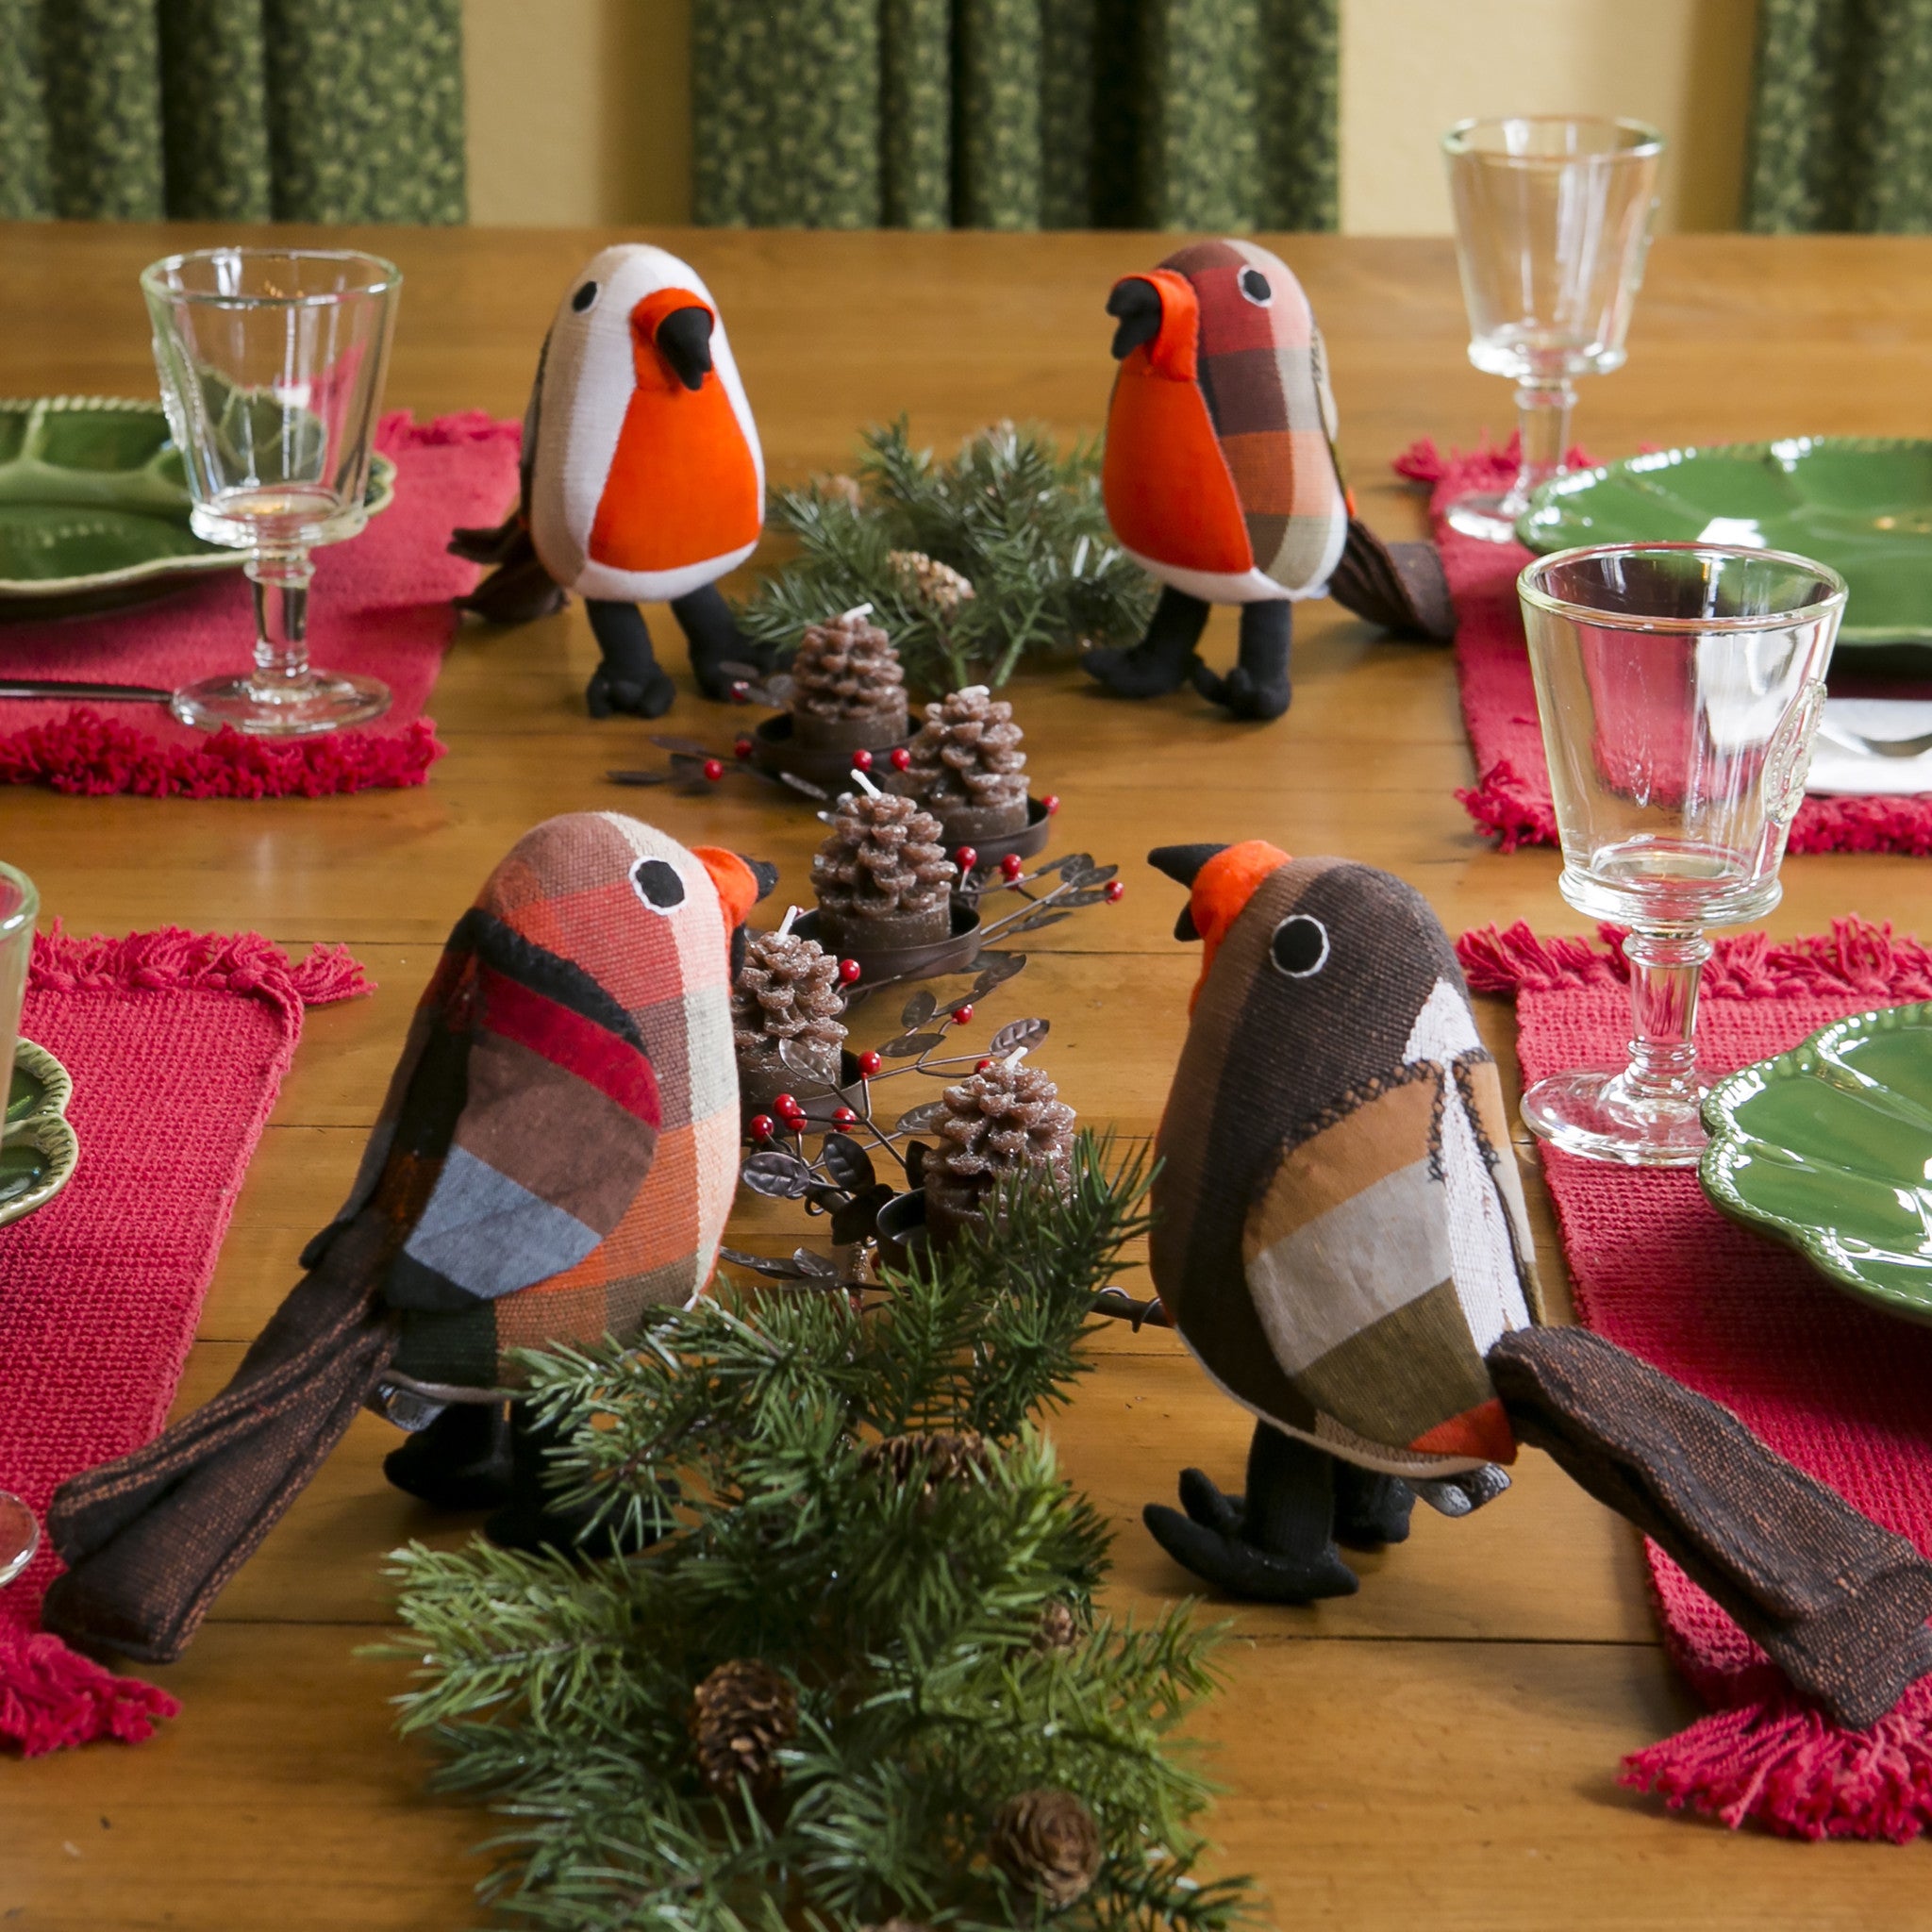 Red Robins will be the perfect addition to your table centerpiece!